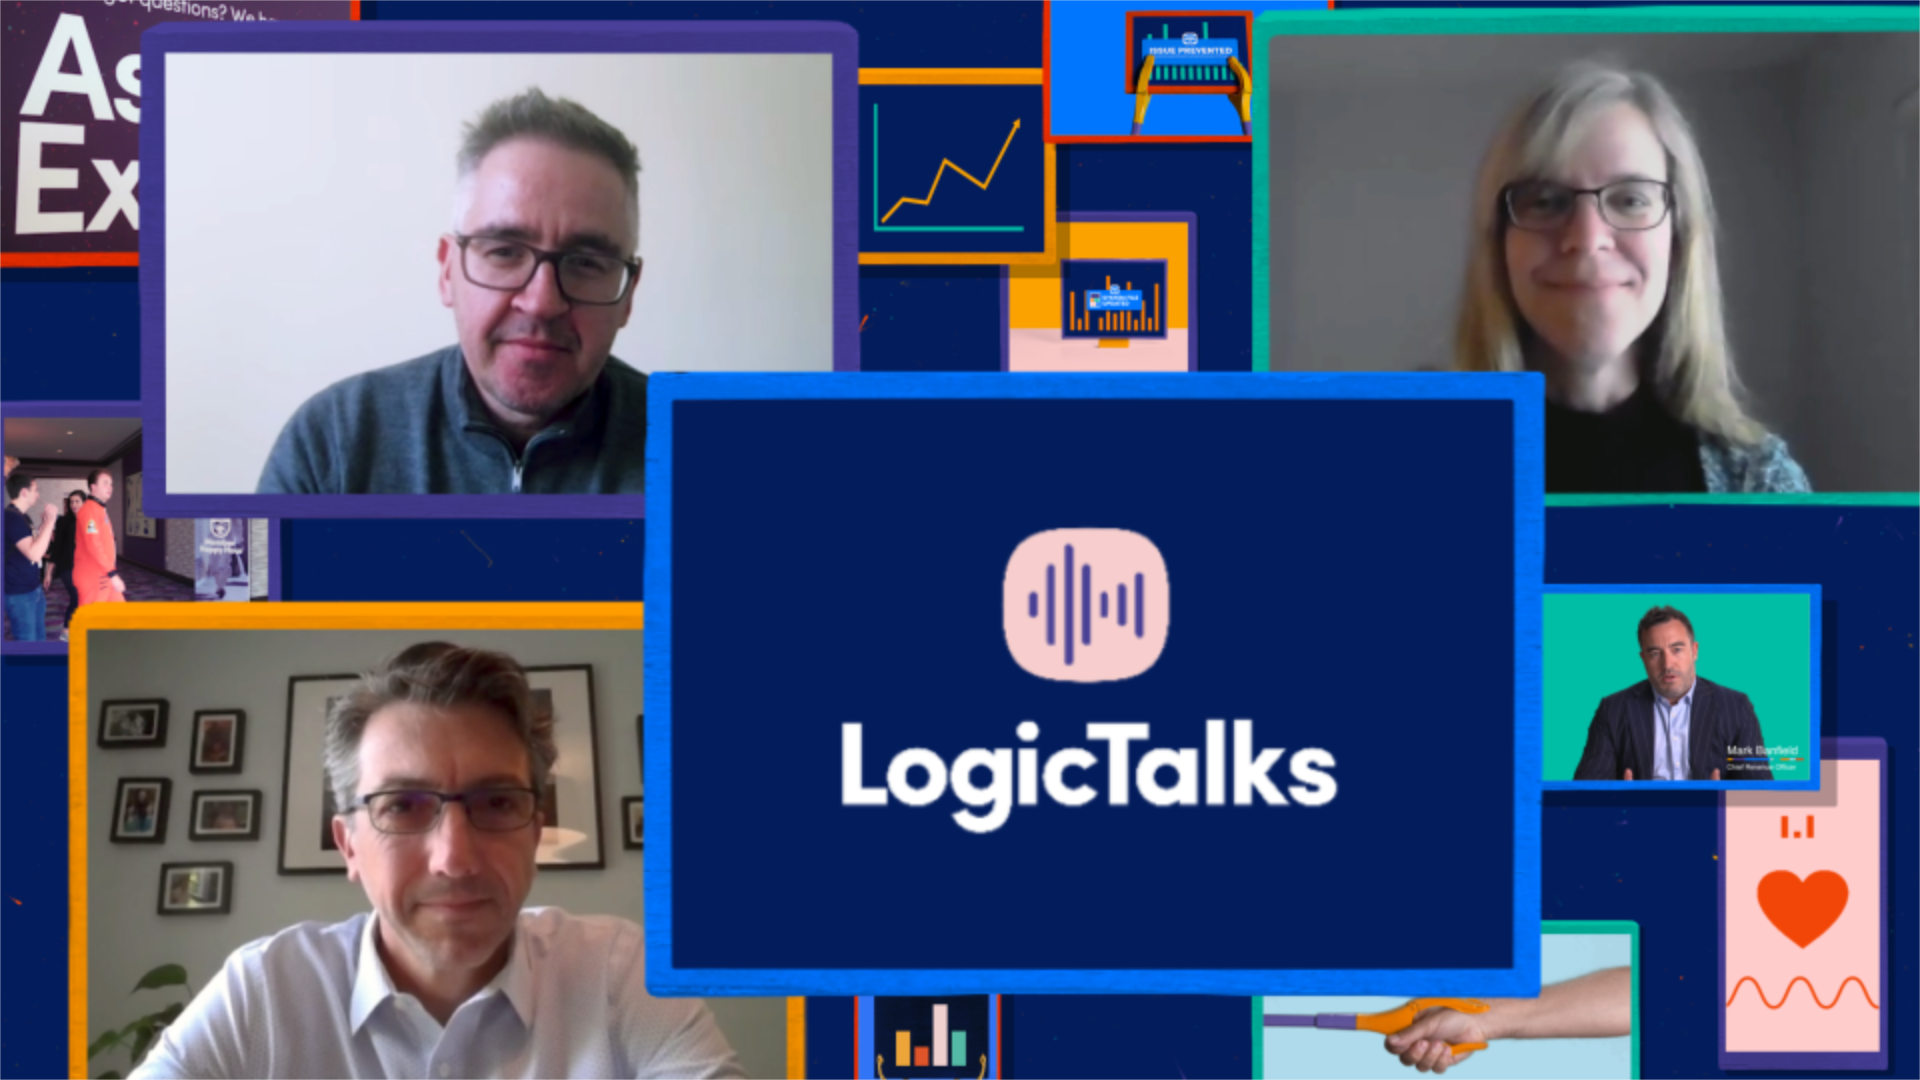 LogicTalks: Meeting the Moment and Needs of LM Customers